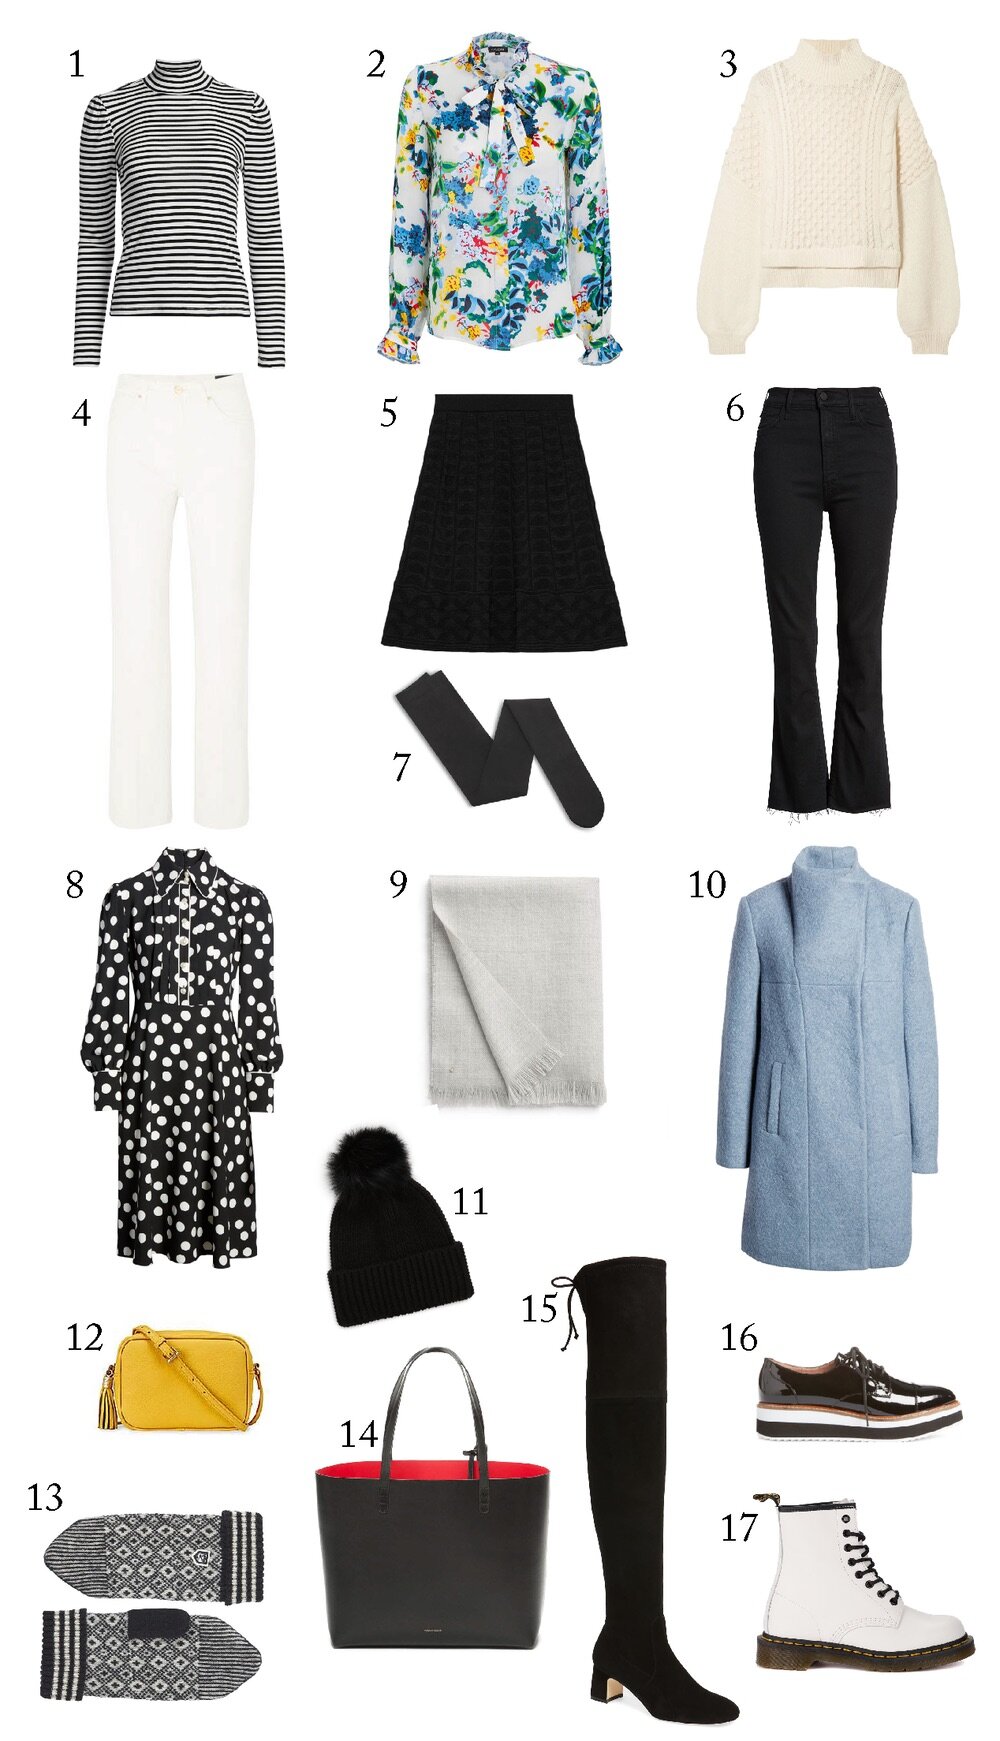 How to Pack a Carry-On Capsule Wardrobe in the Winter - Journal